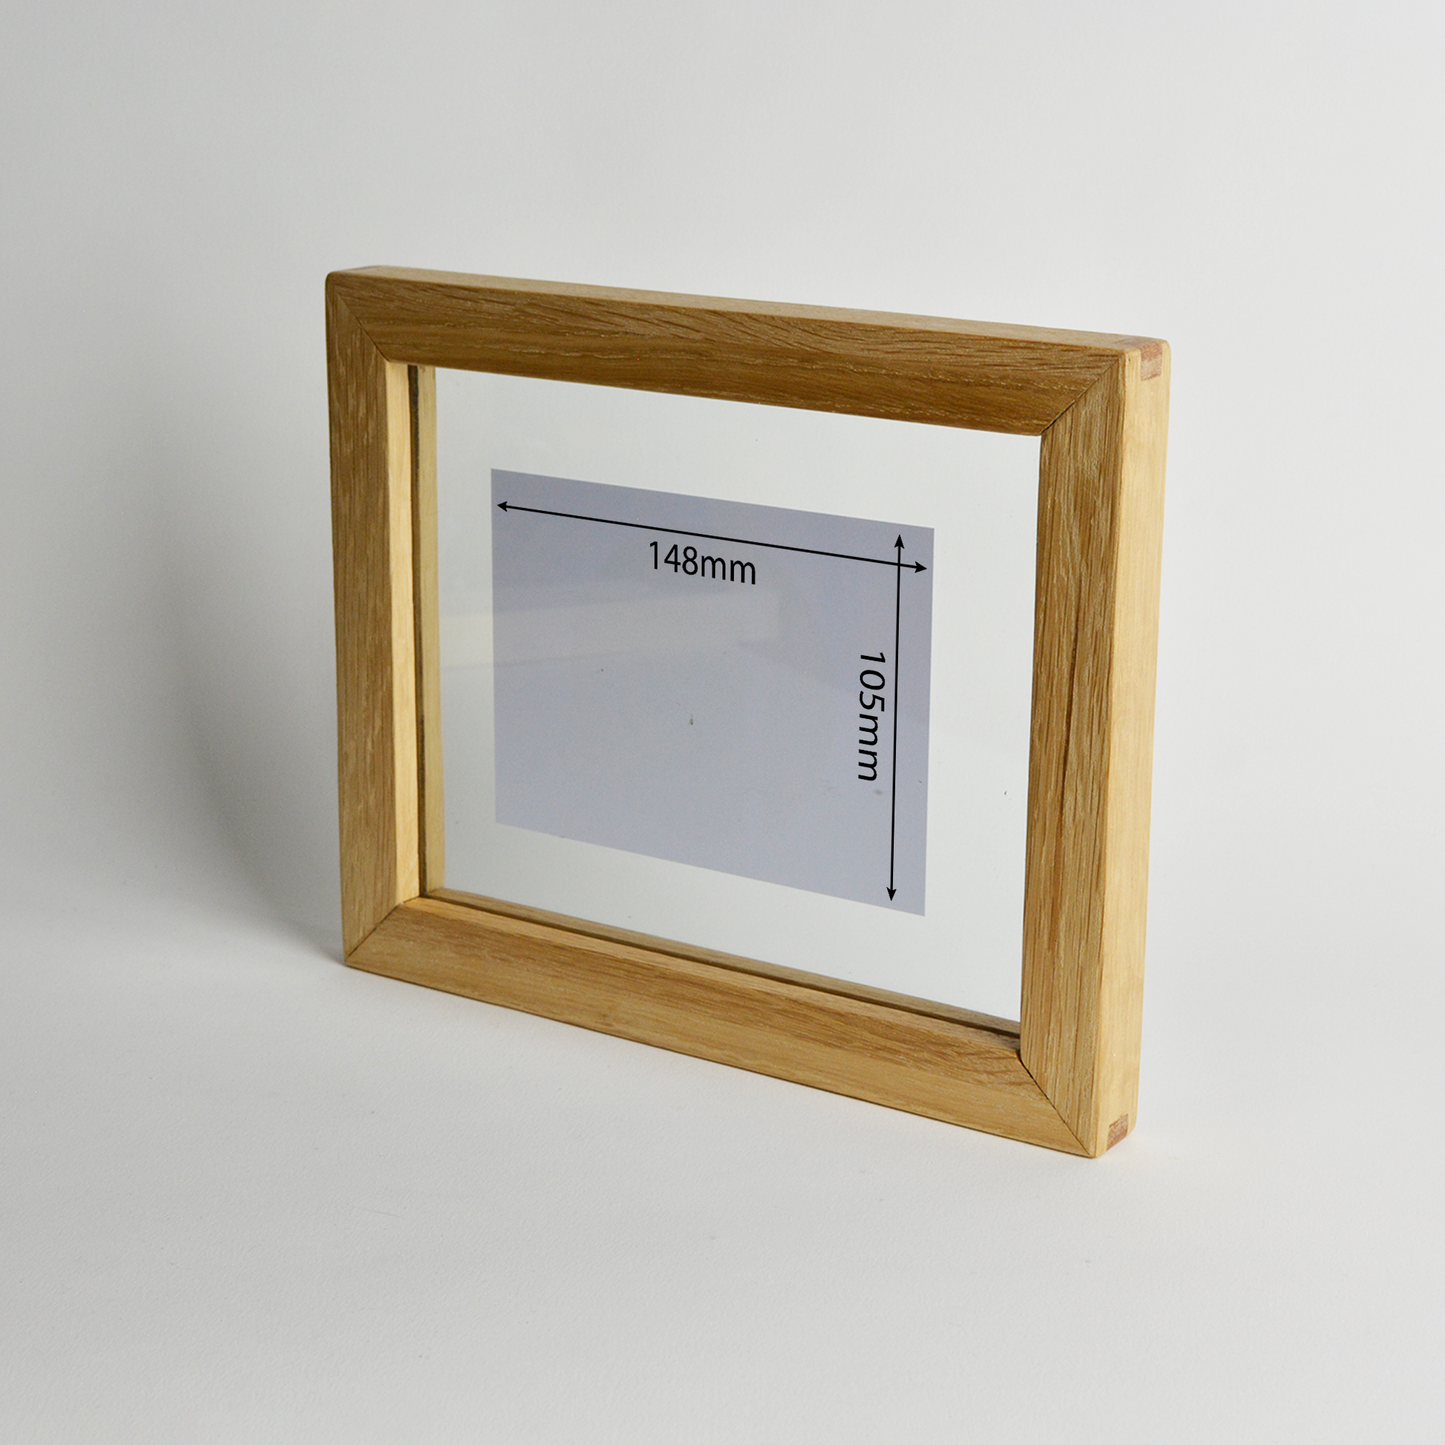 Floating A6 Picture Frame from recycled Oak and Glass - Thick frame - Handmade